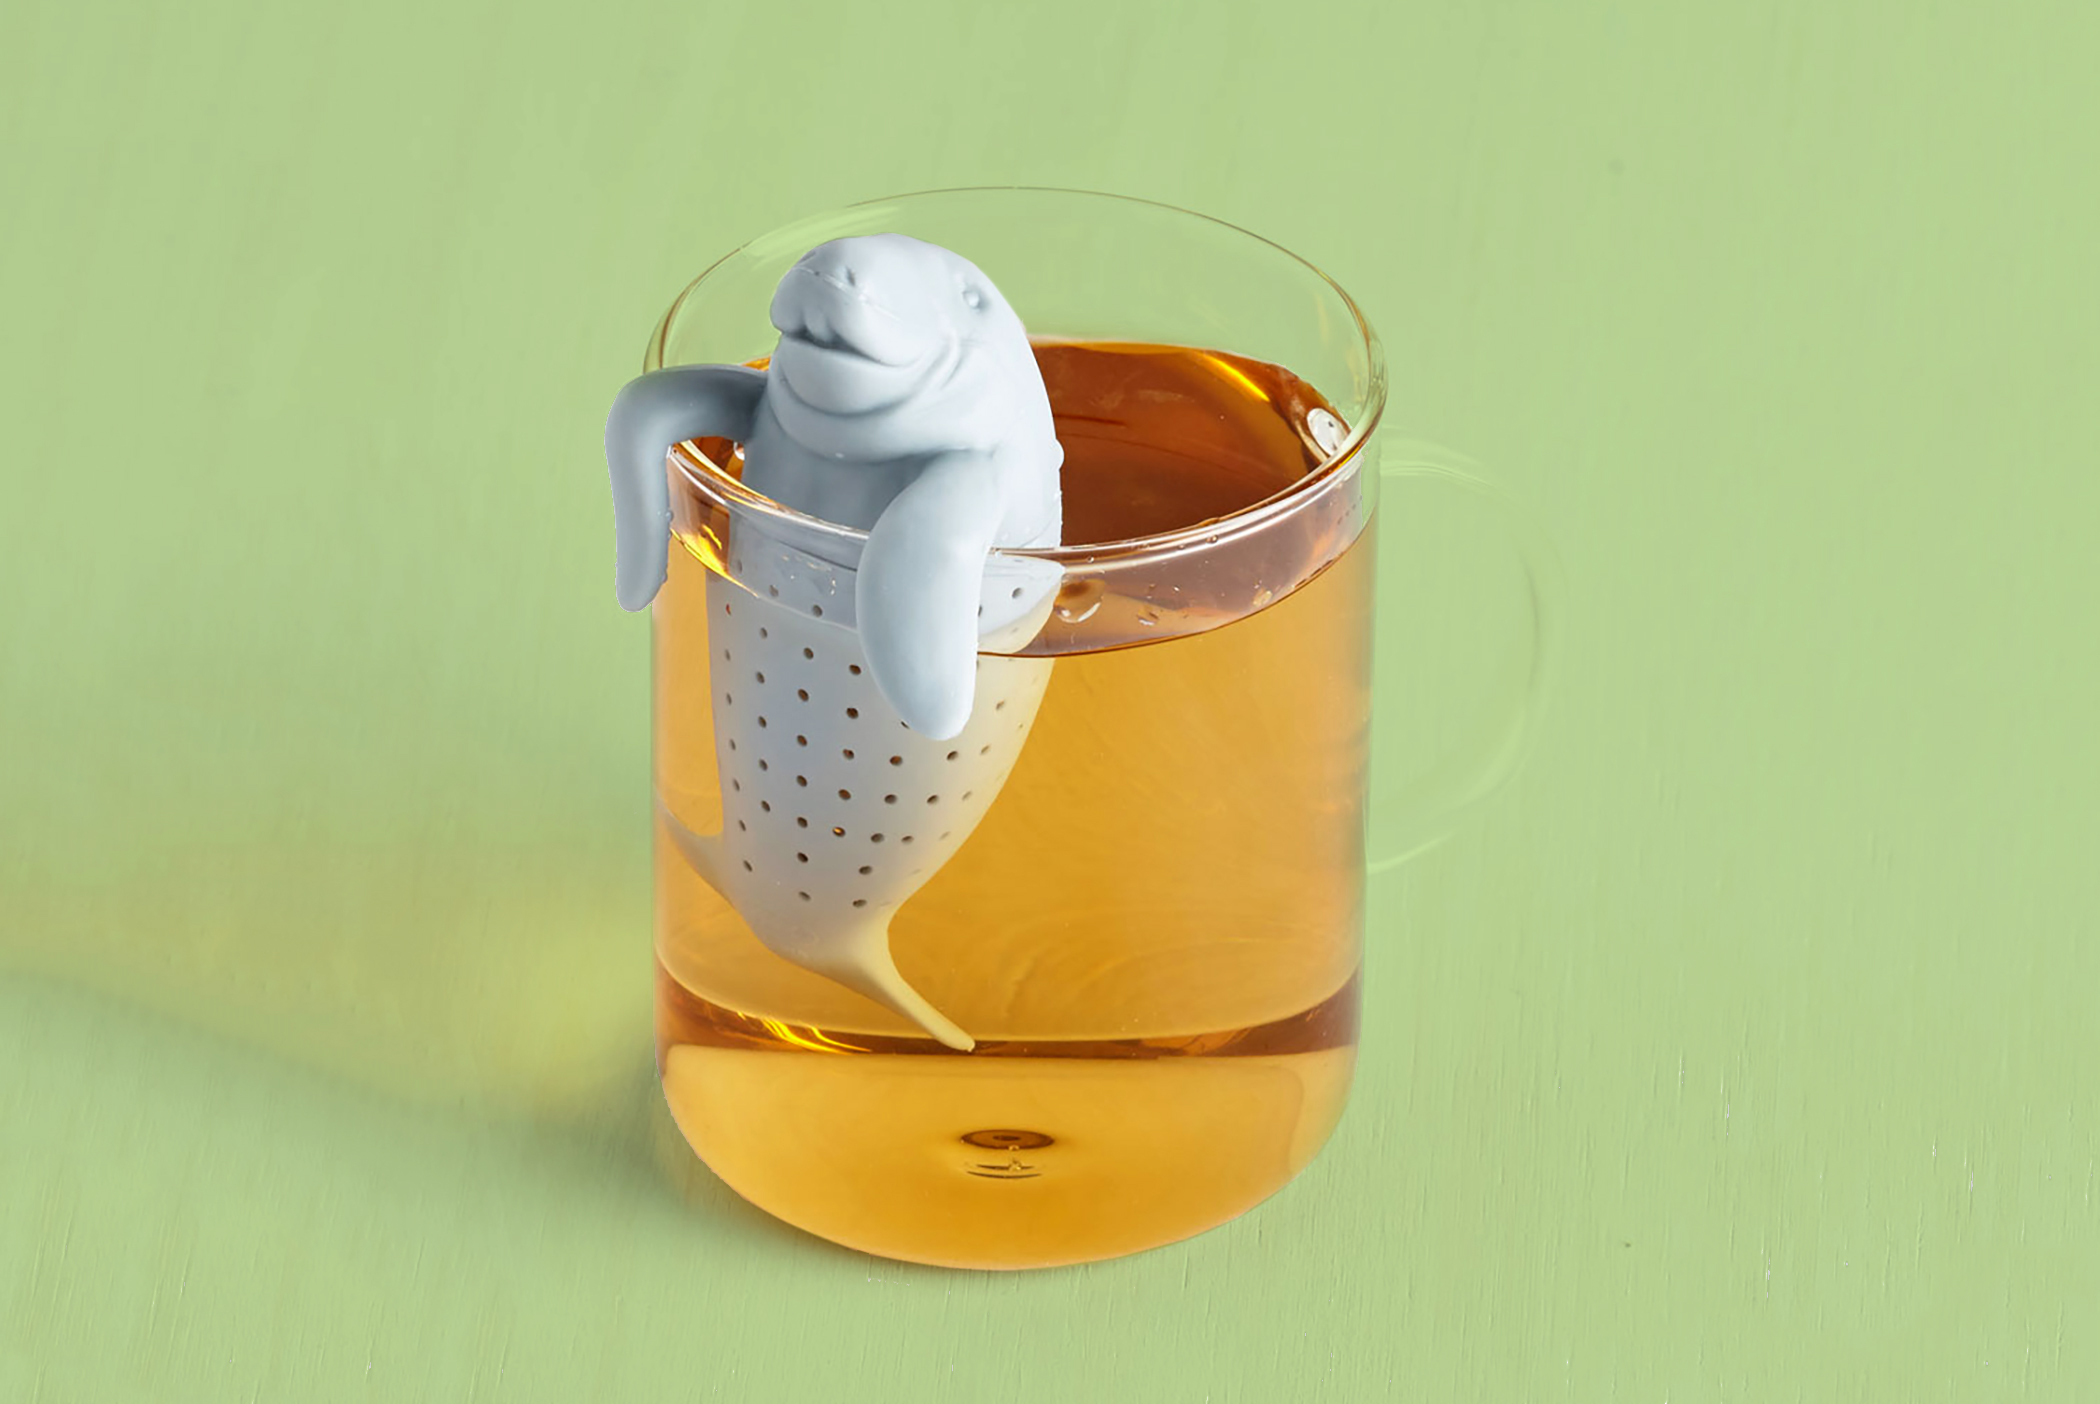 Sea for Two Tea Infuser from ModCloth